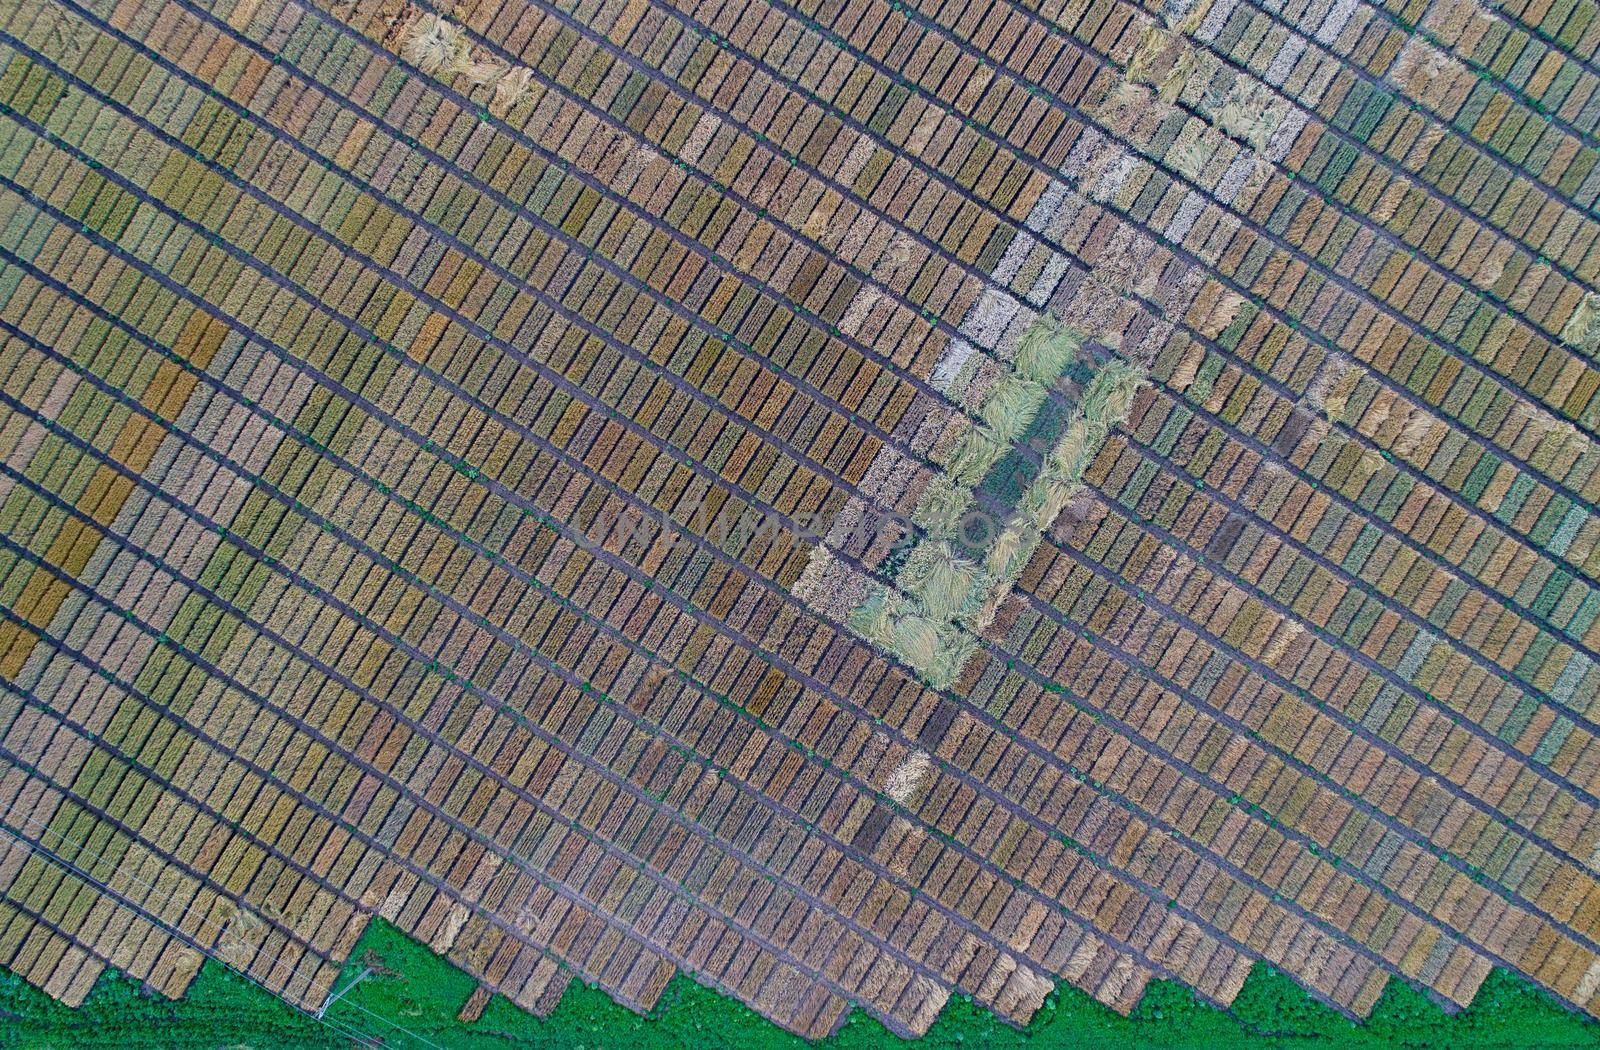 Aerial image of agricultural test plots with different sorts of cereal crops, hybrids, shoot from drone